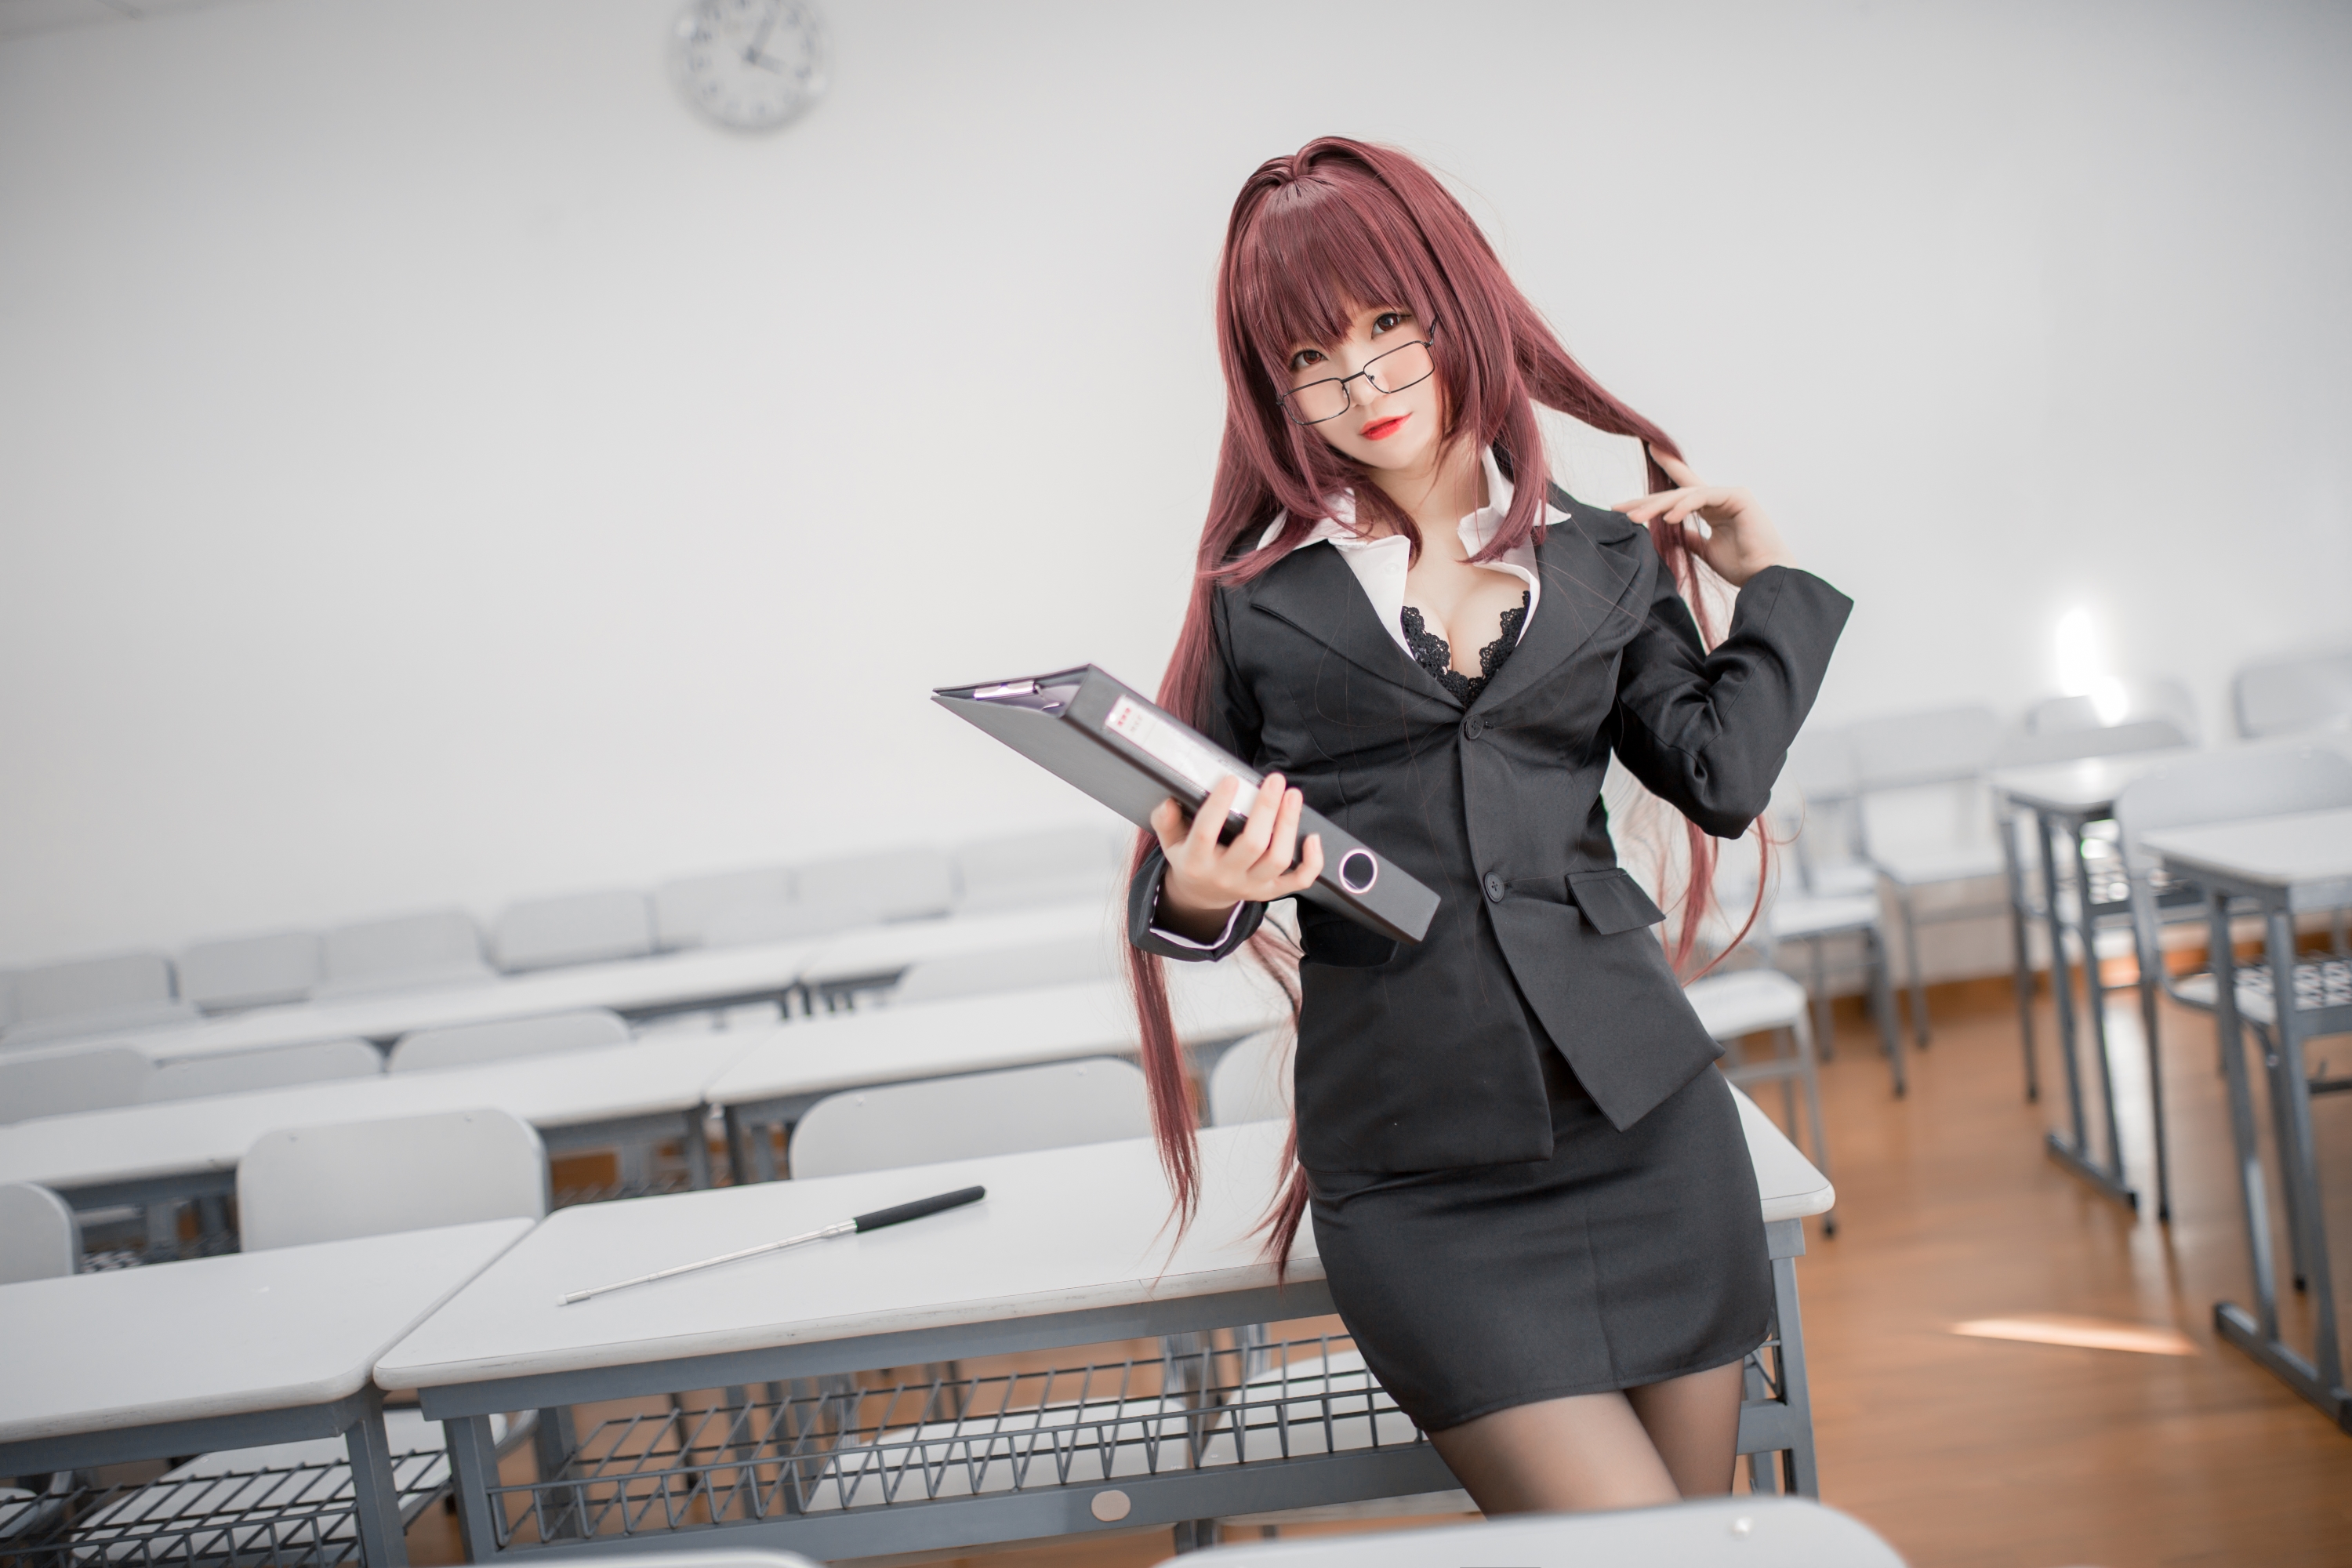 People 3000x2000 teachers suits women with glasses glasses asian cosplayer classroom indoors Yoko Cos cosplay Asian women